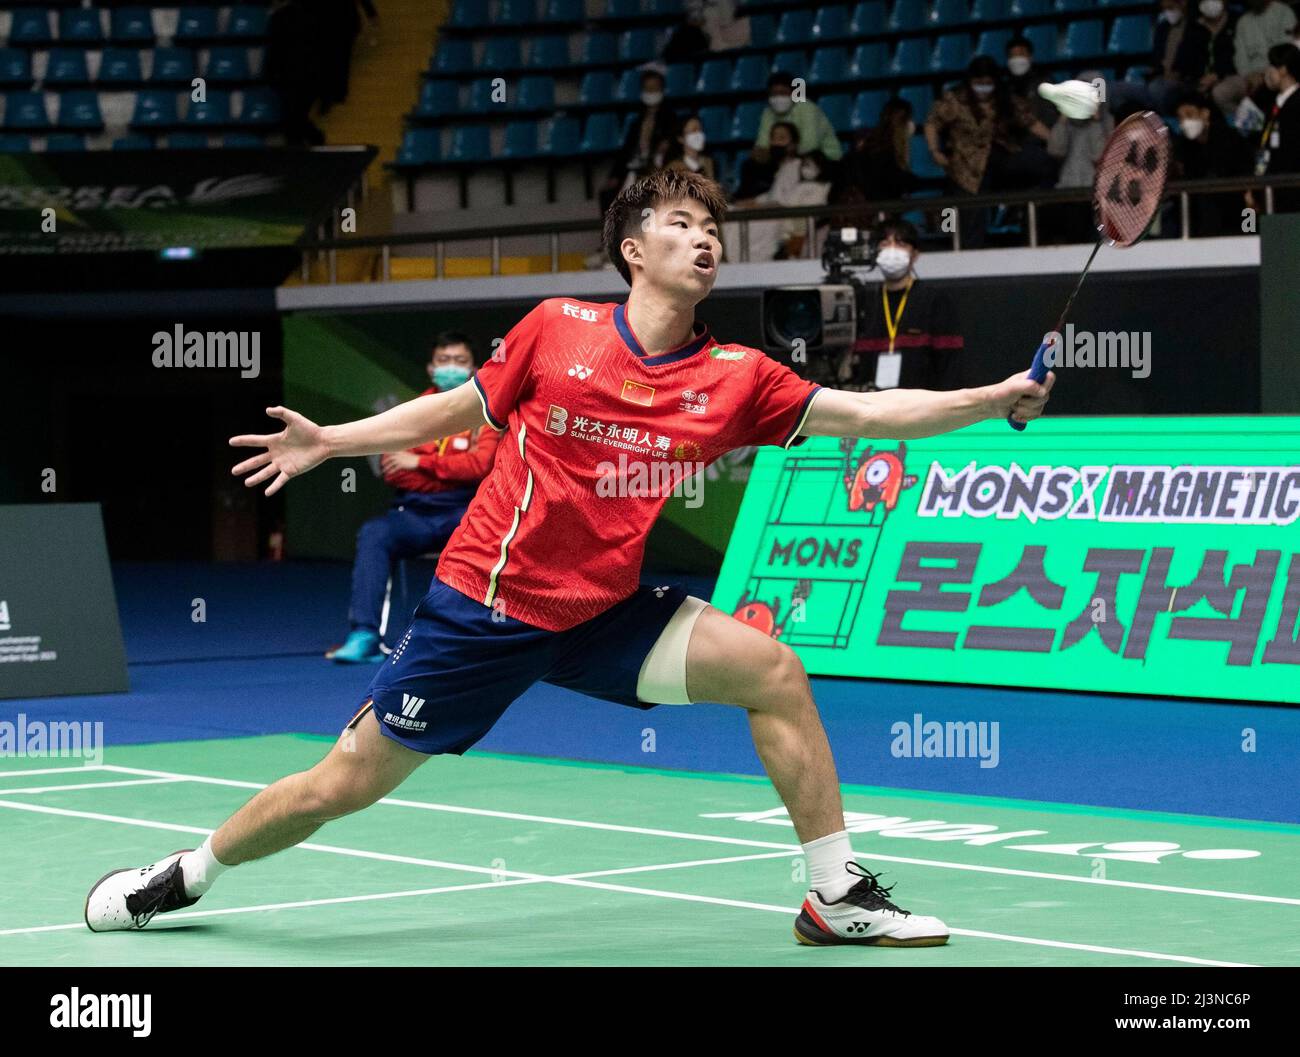 Suncheon, South Korea. 9th Apr, 2022. Weng Hongyang of China hits a return  during the men's singles semifinal against Victor Svendsen of Denmark at  the BWF Korea Open Badminton Championships 2022 in